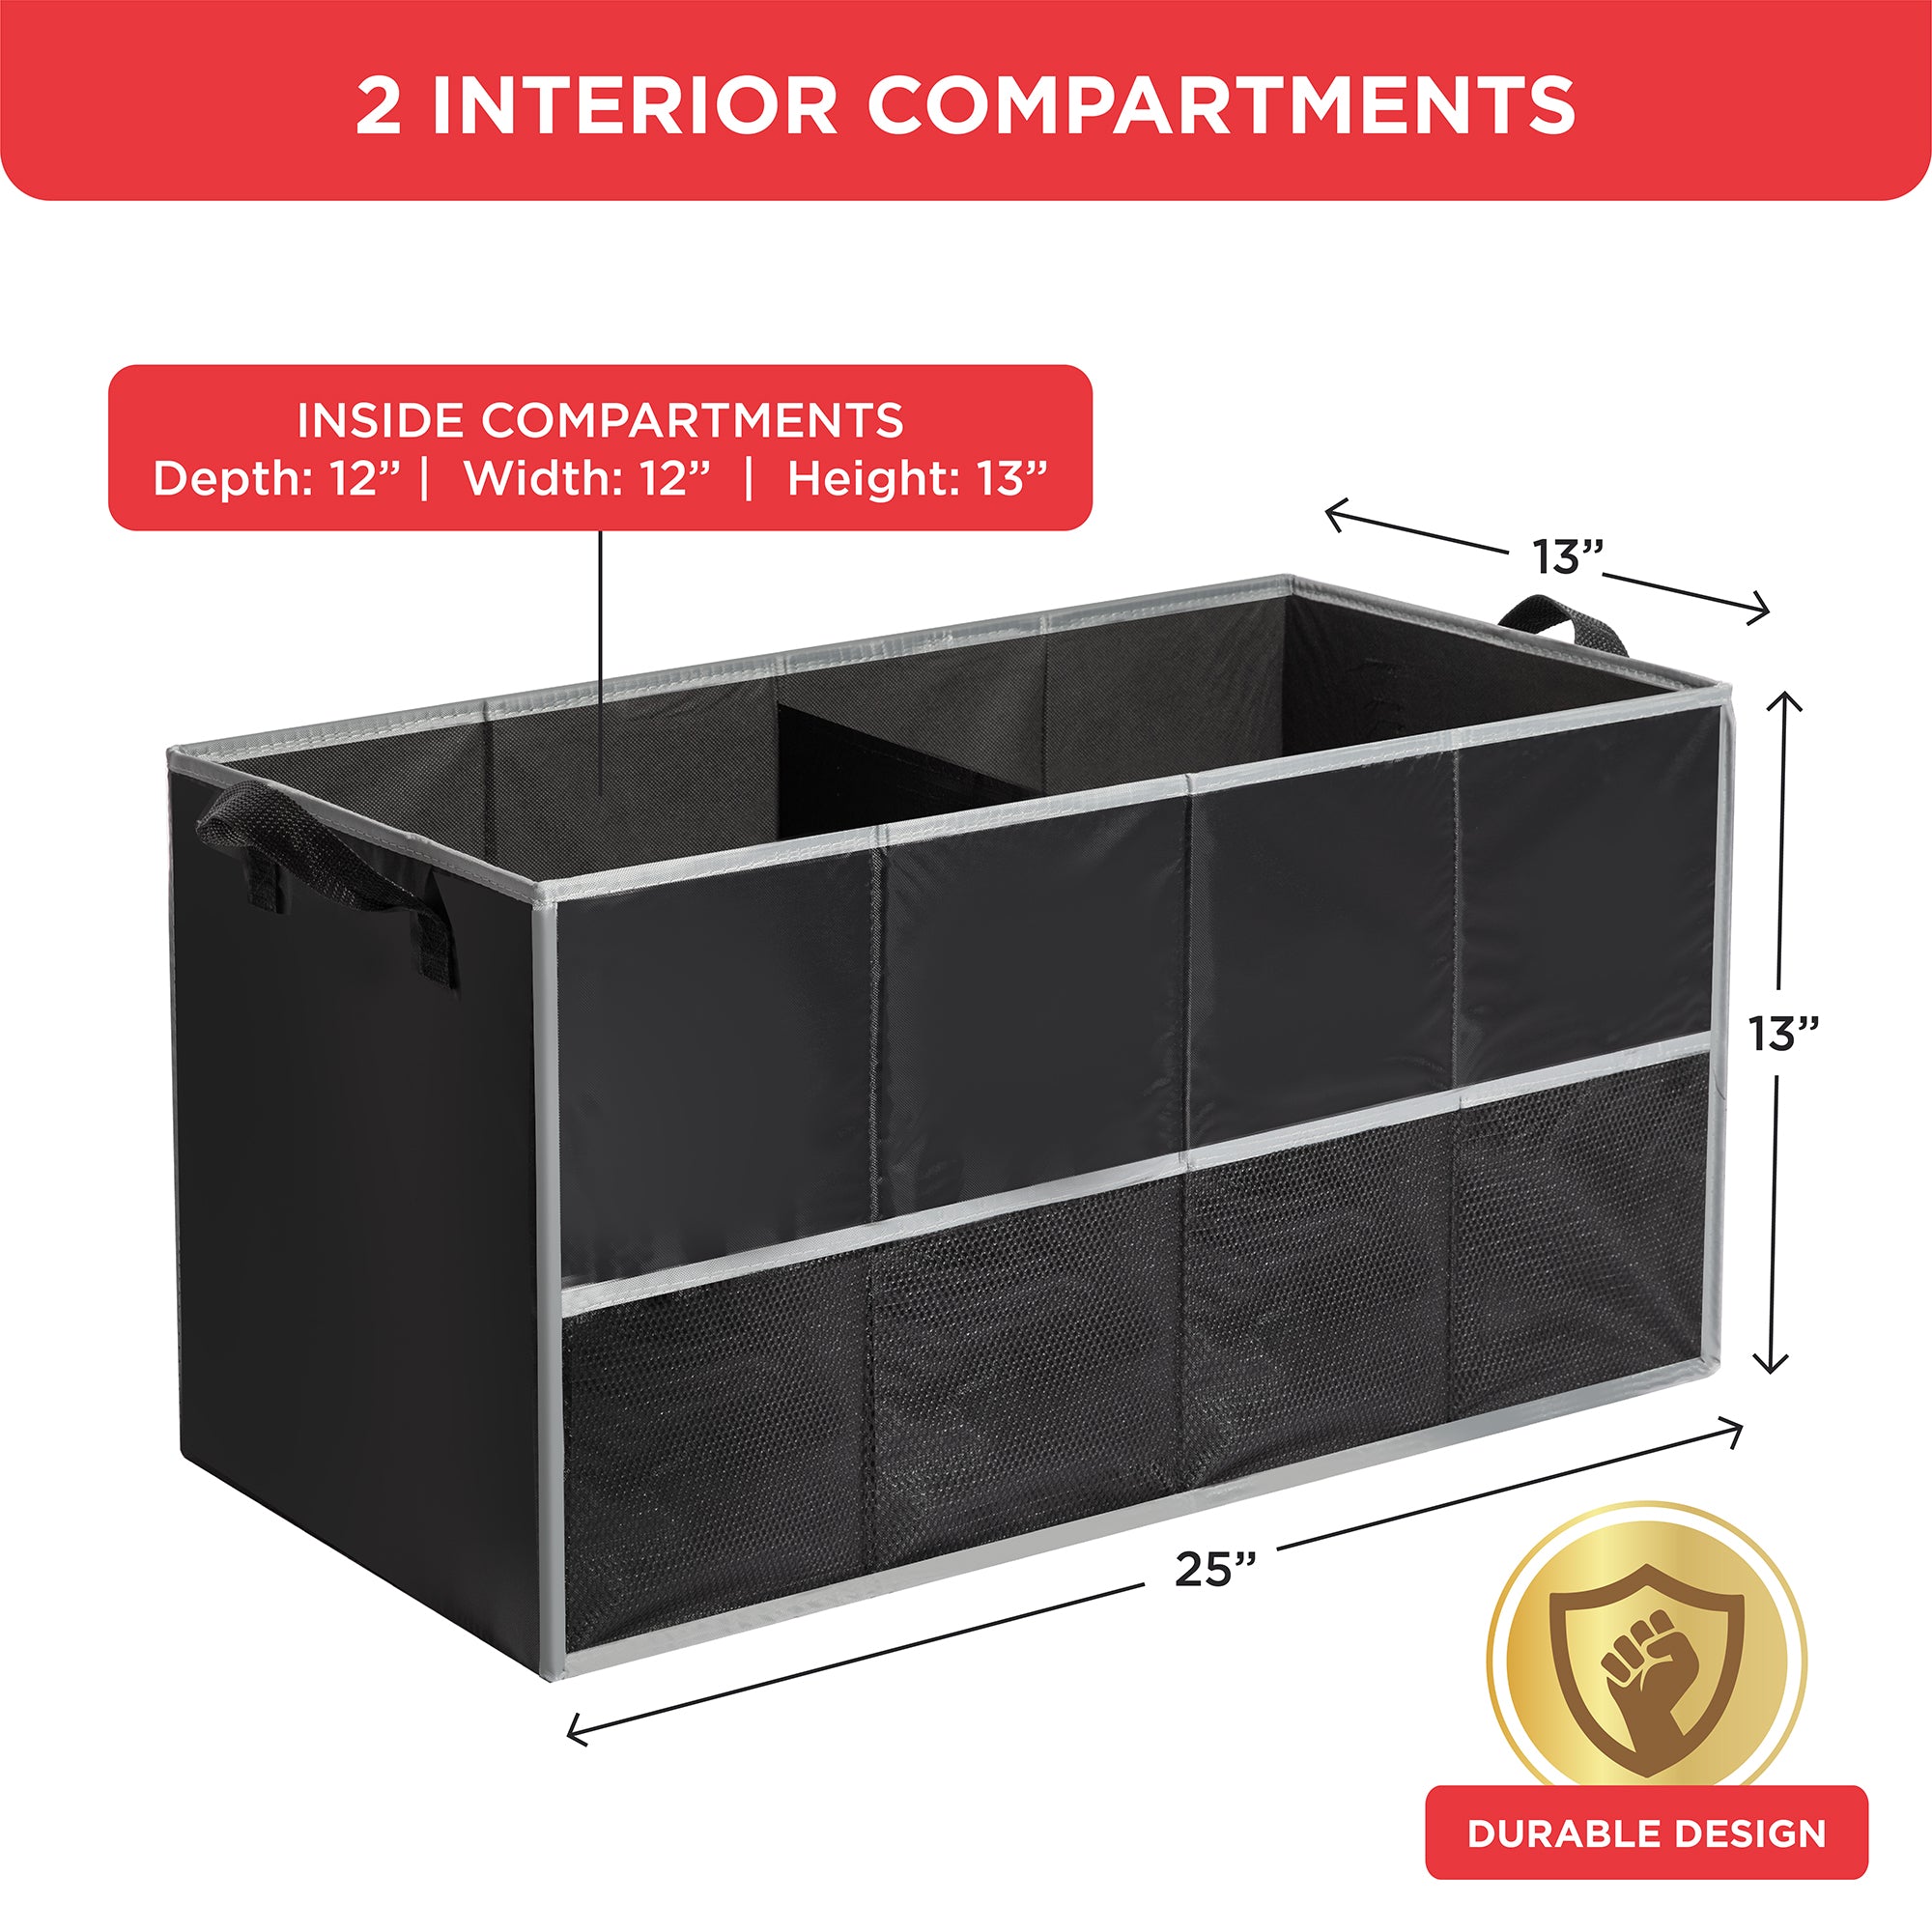 Auto Trunk organizer with 2 Large compartments, Handles, and Side Pockets – 25.5” L x 13” W x 13.25” H - Black